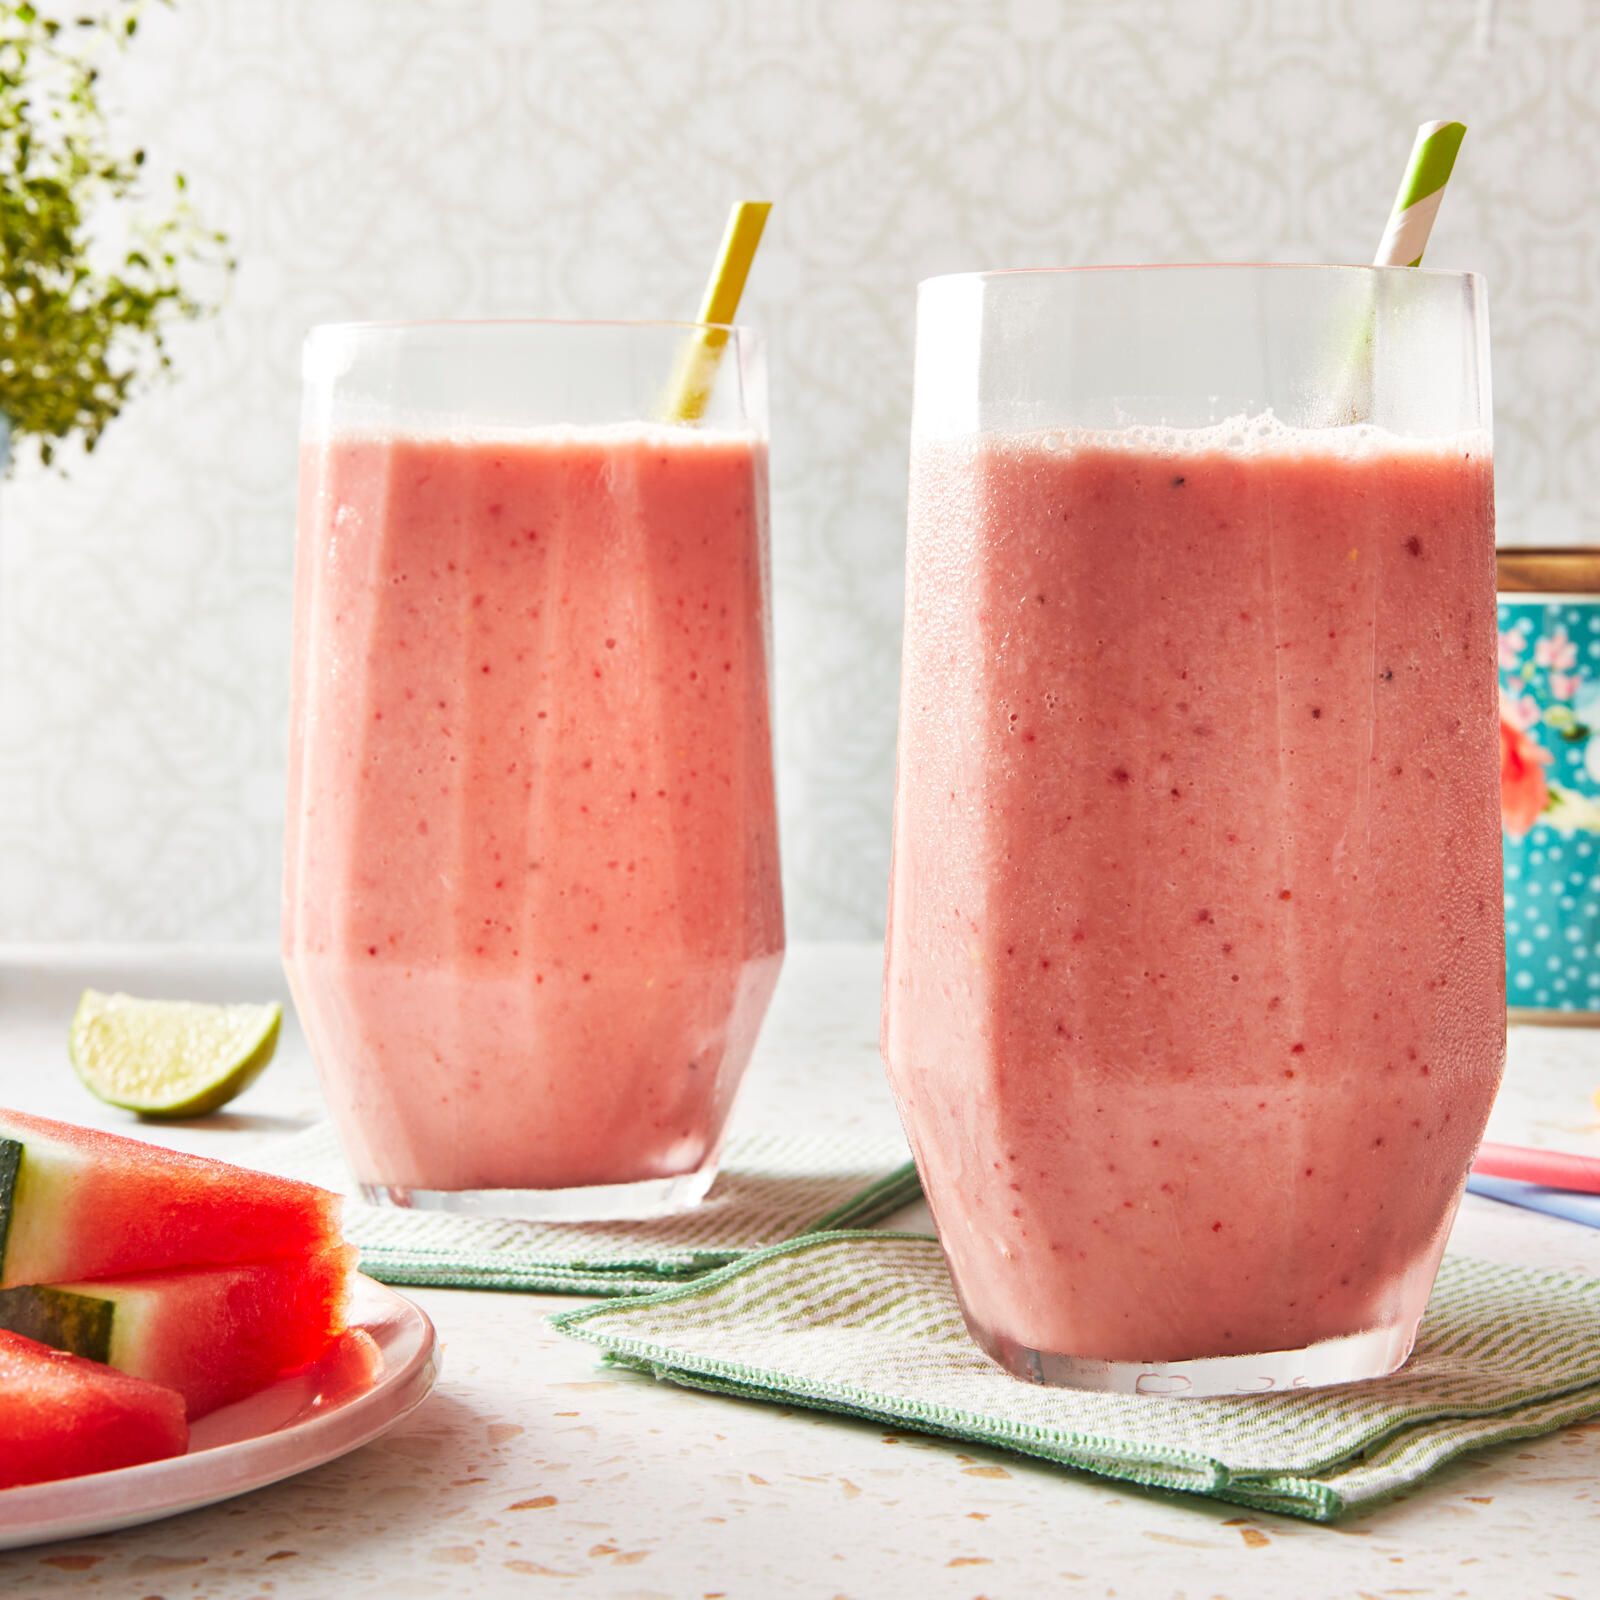 Easy Watermelon Smoothie Recipe - How to Make a Watermelon Smoothie